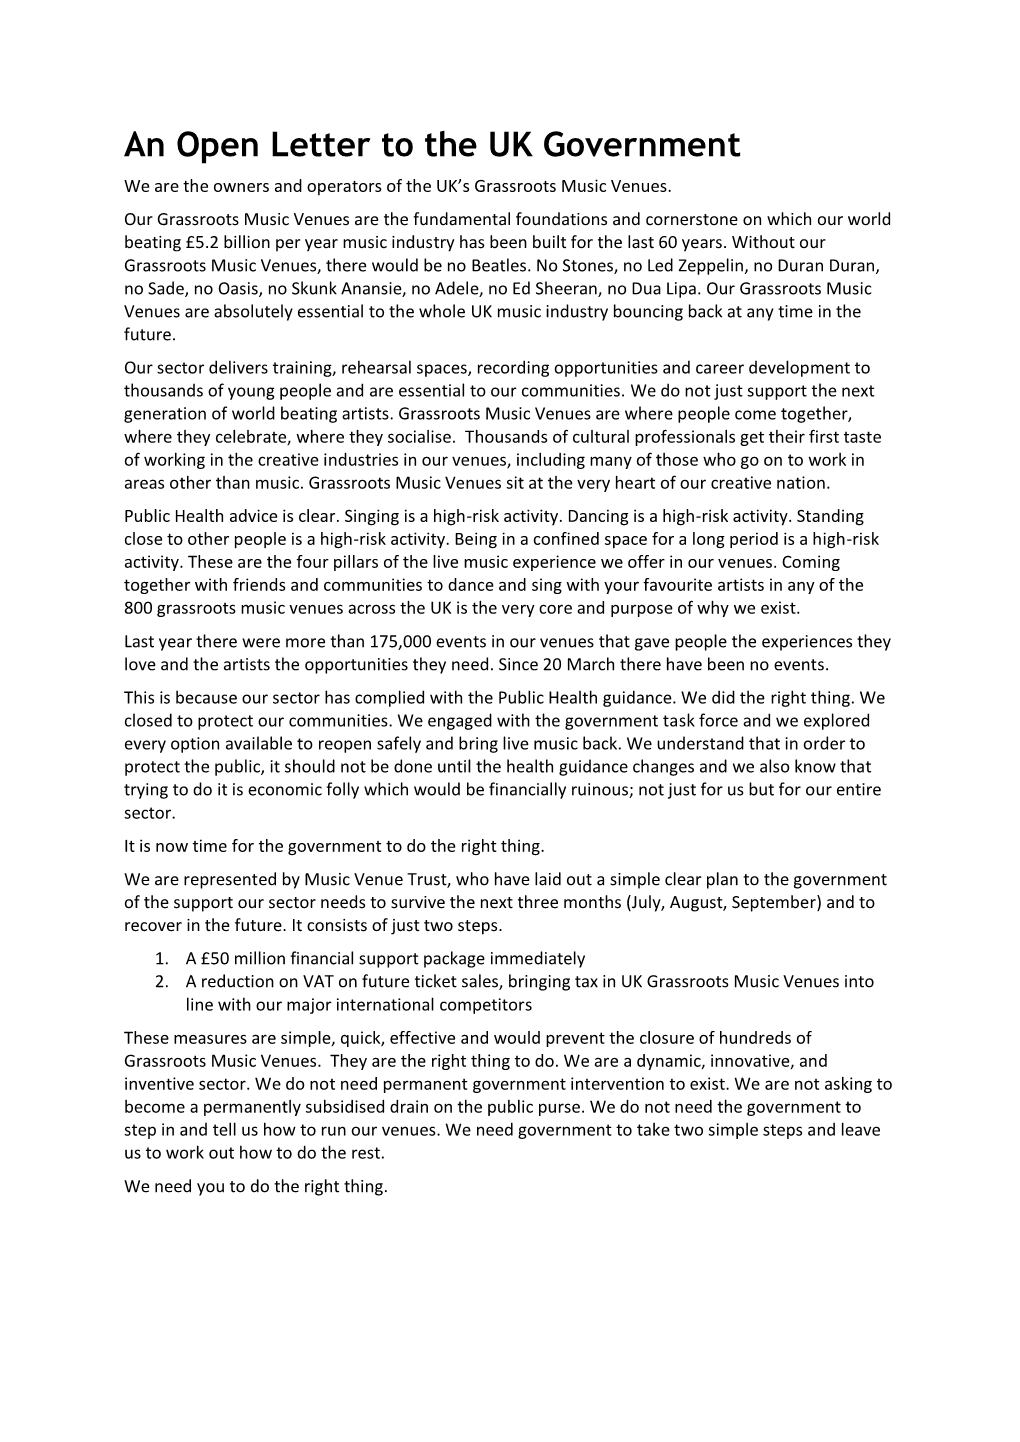 An Open Letter to the UK Government We Are the Owners and Operators of the UK’S Grassroots Music Venues